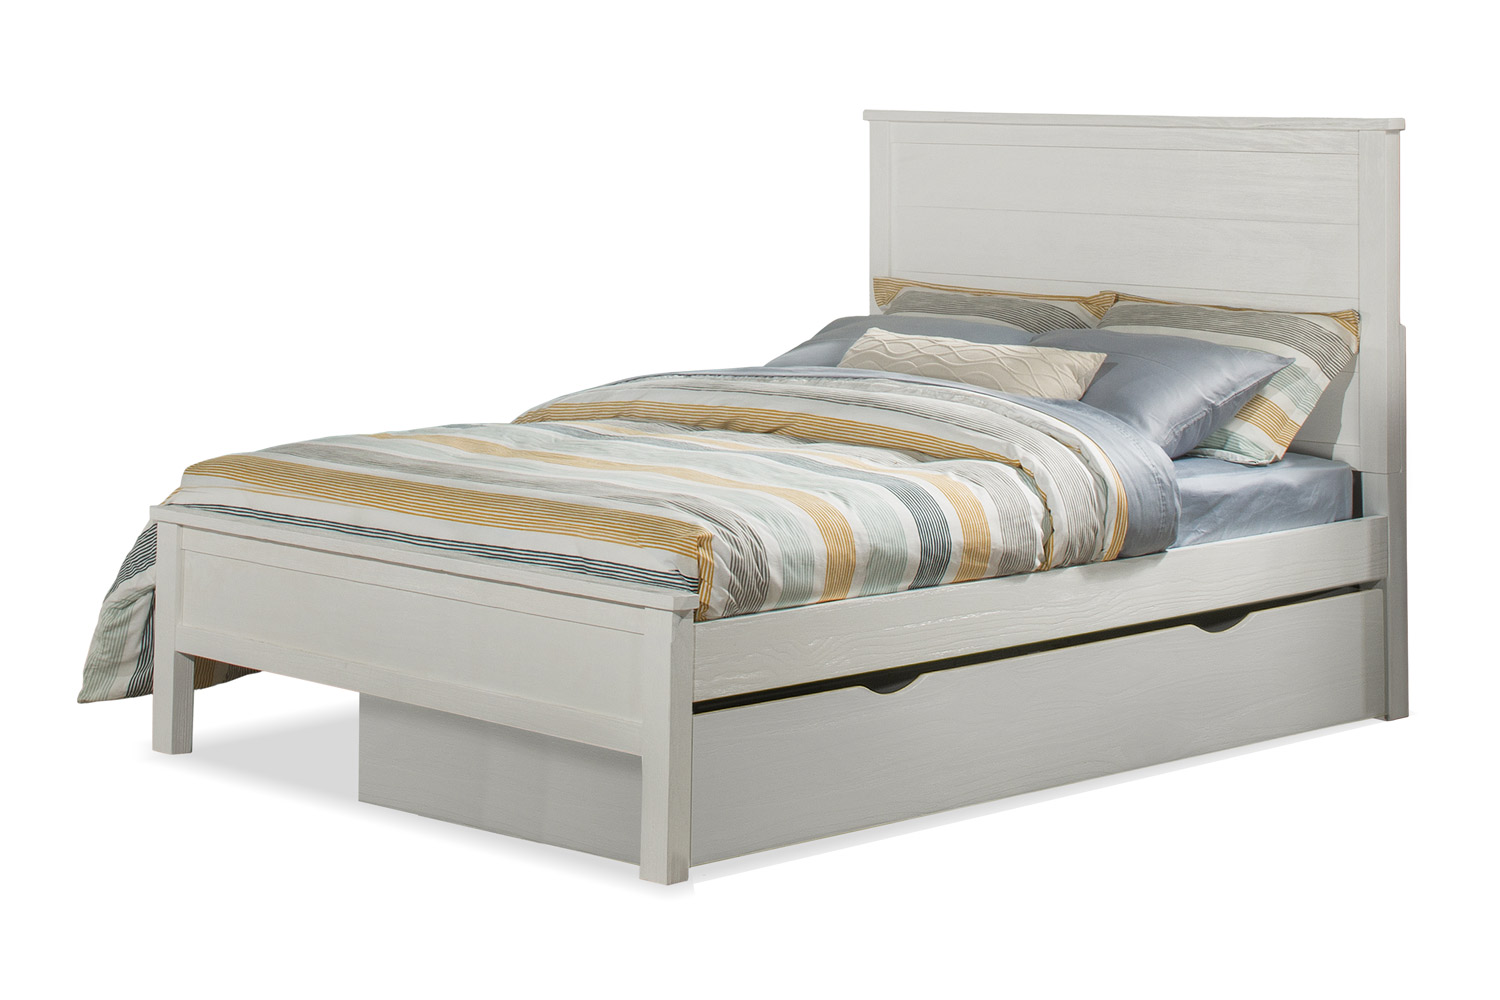 NE Kids Highlands Alex Flat Panel Bed with Trundle - White